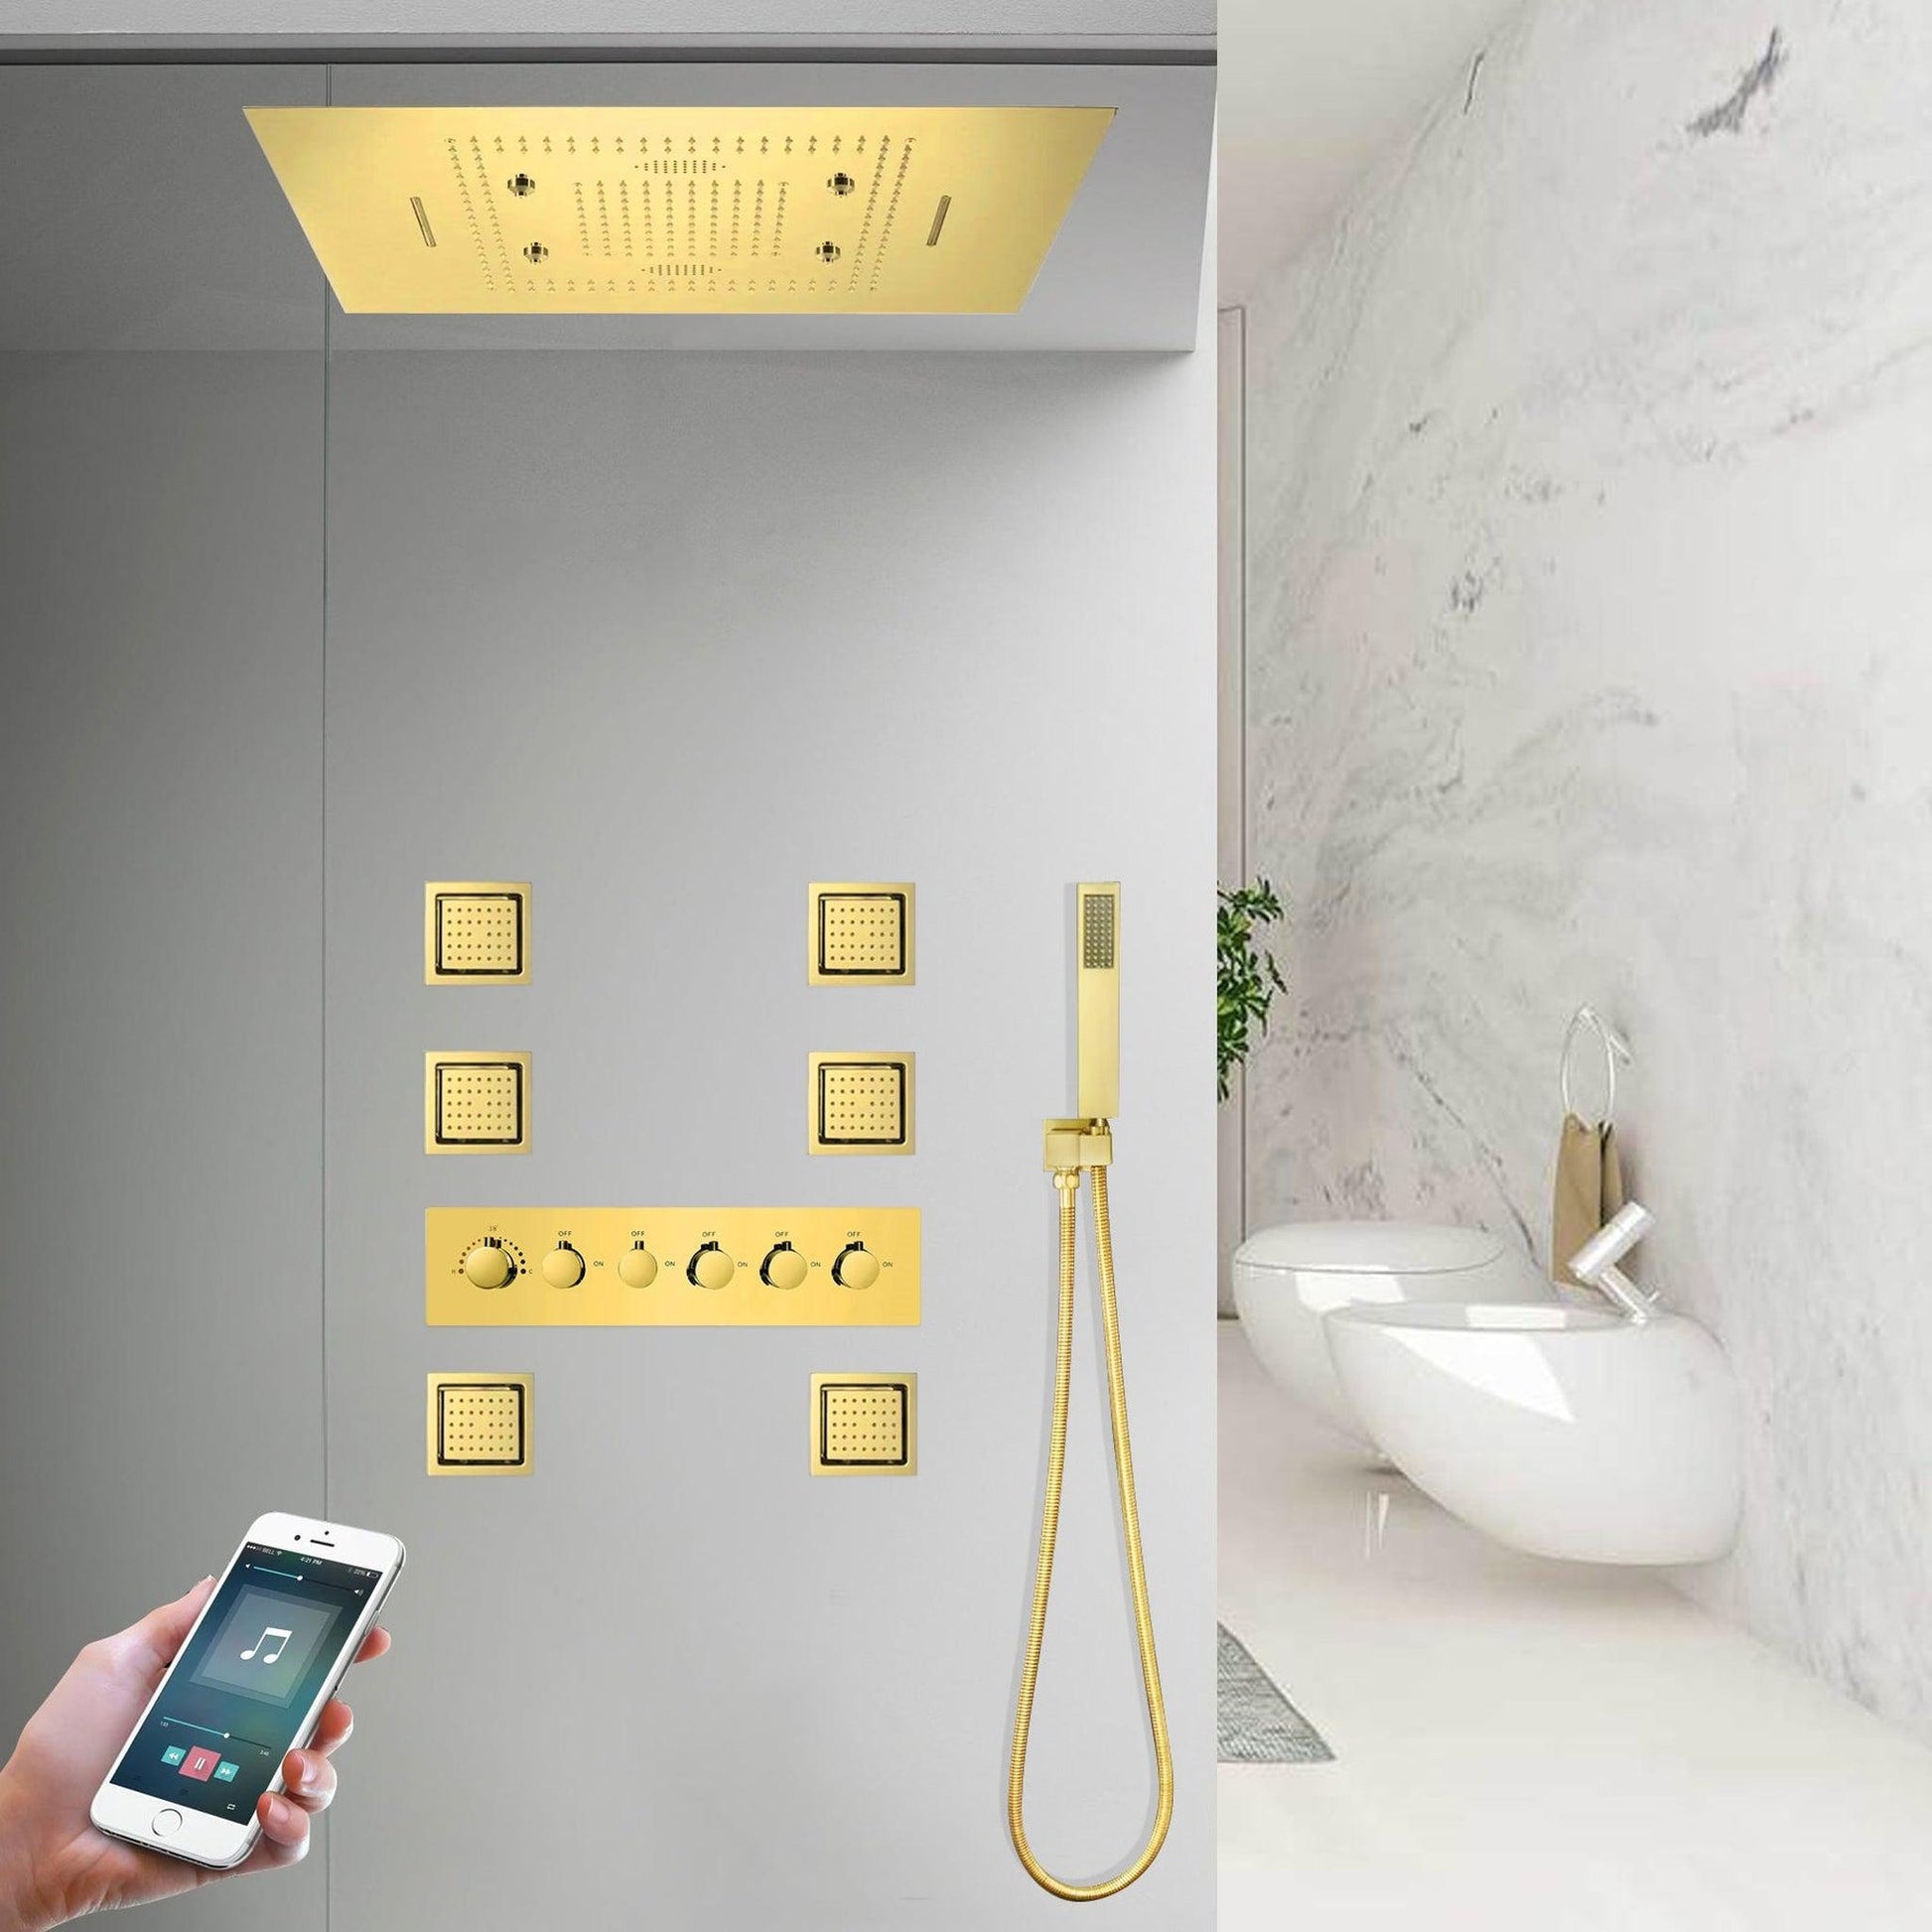 FontanaShowers Benevento Creative Luxury Gold Recessed Ceiling Mounted LED Musical Thermostatic Phone Controlled Waterfall, Rainfall & Mist Shower System With 6-Jet Body Sprays and Hand Shower